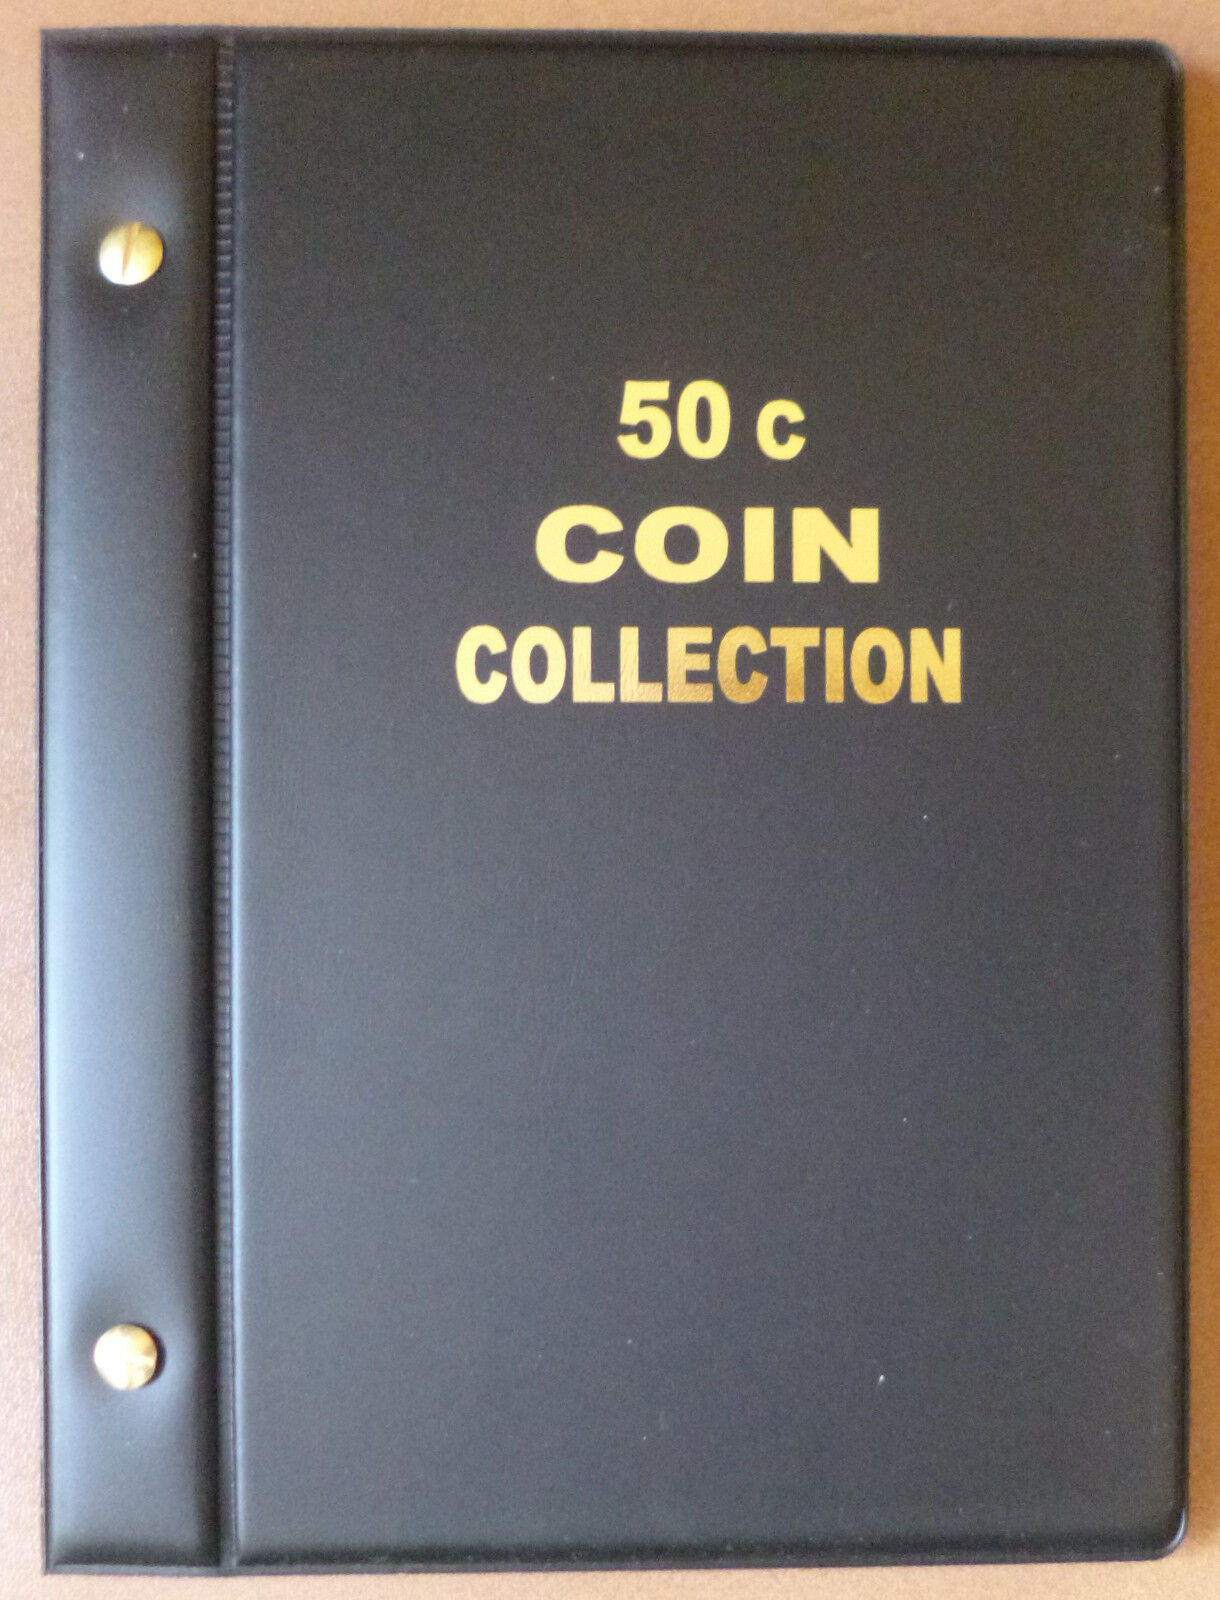 VST AUSTRALIAN COIN ALBUM for 50c COLLECTION 1966 to 2023 MINTAGES PRINTED